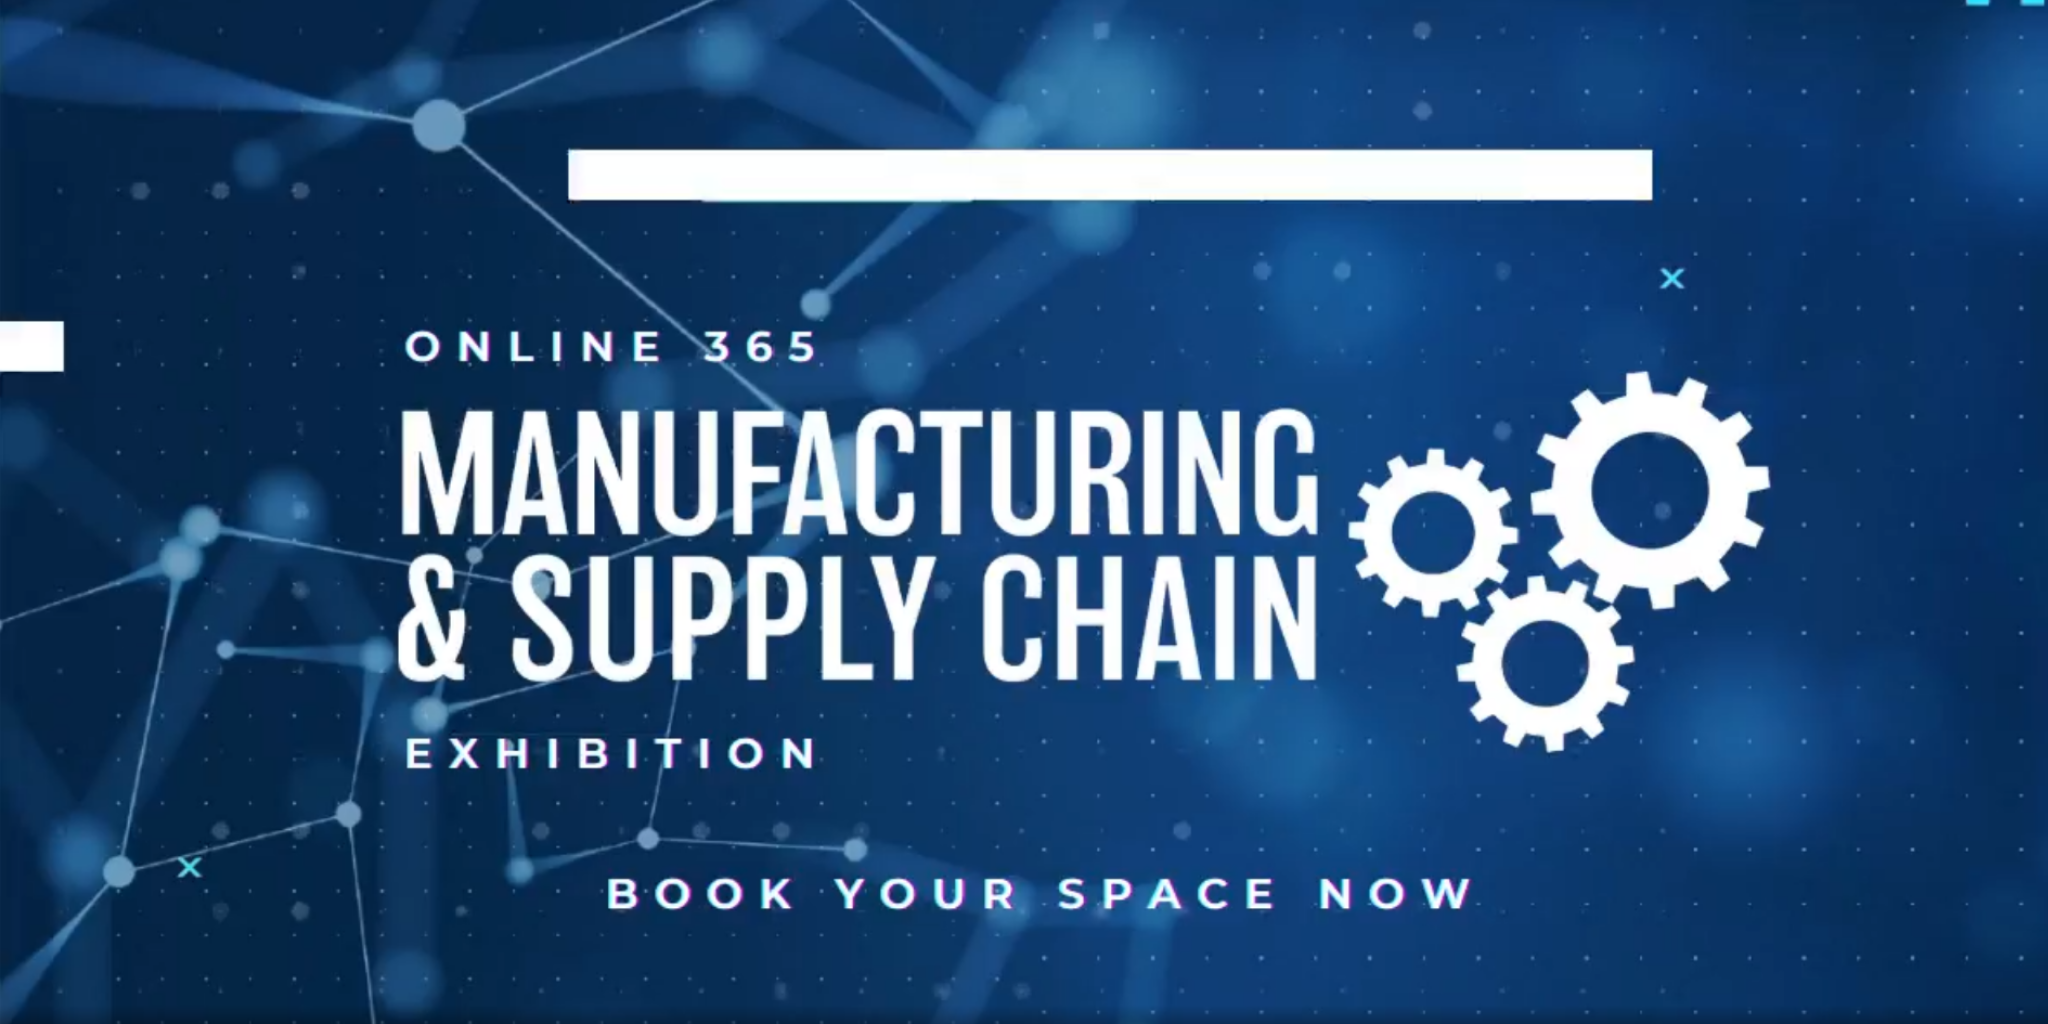 Yelo to Exhibit at 365 Manufacturing & Supply Chain Virtual Exhibition